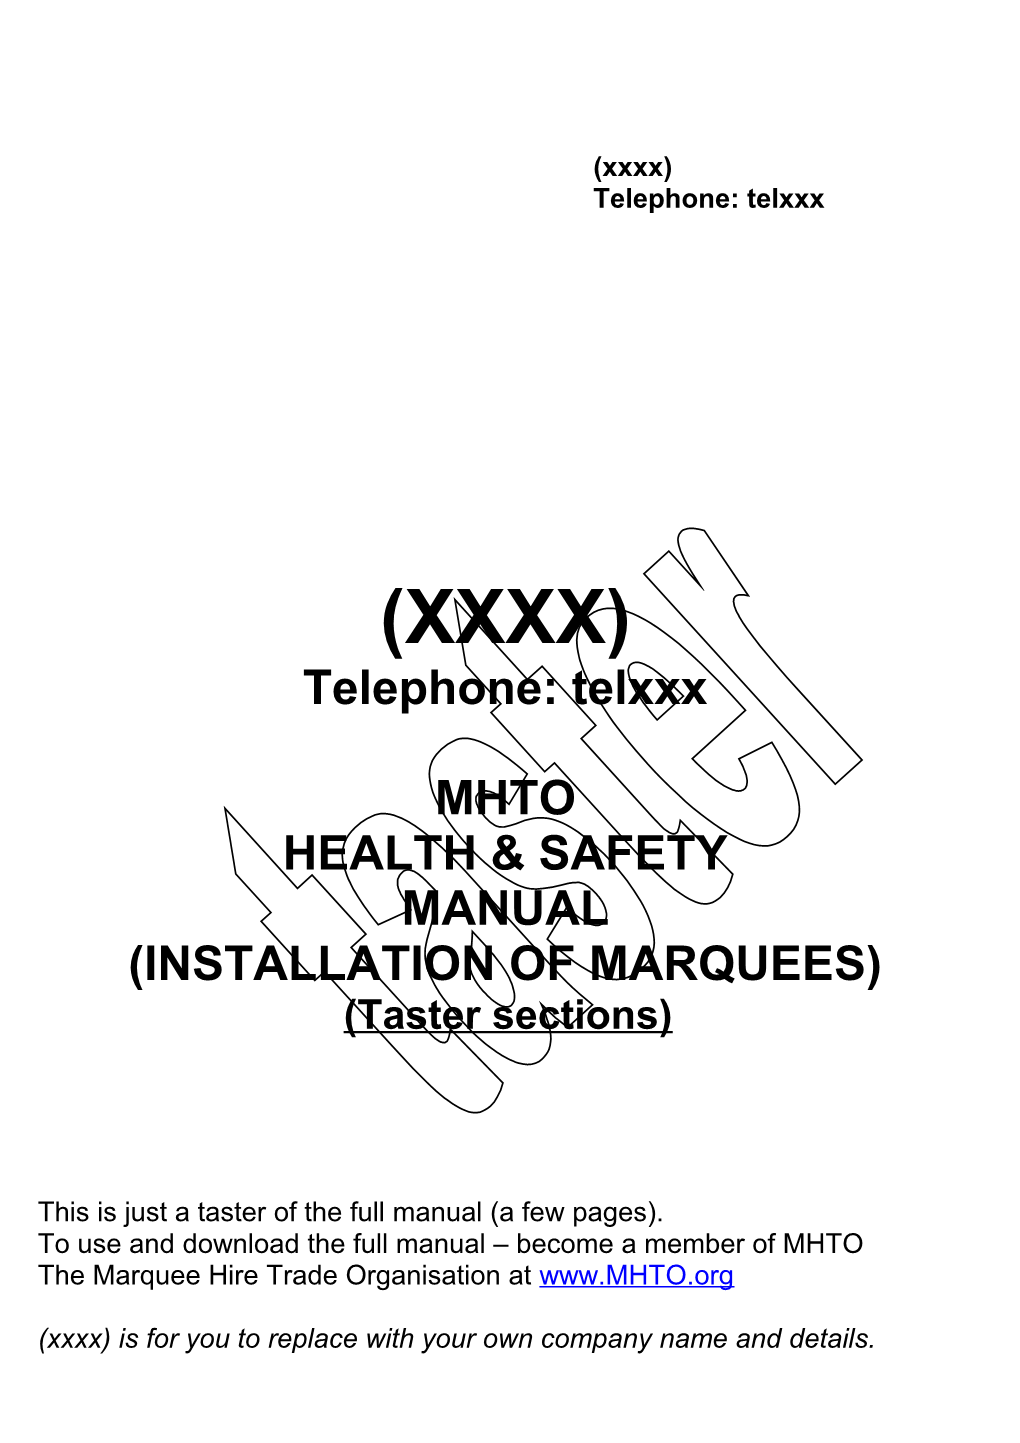 Marquee Health & Safety Manual